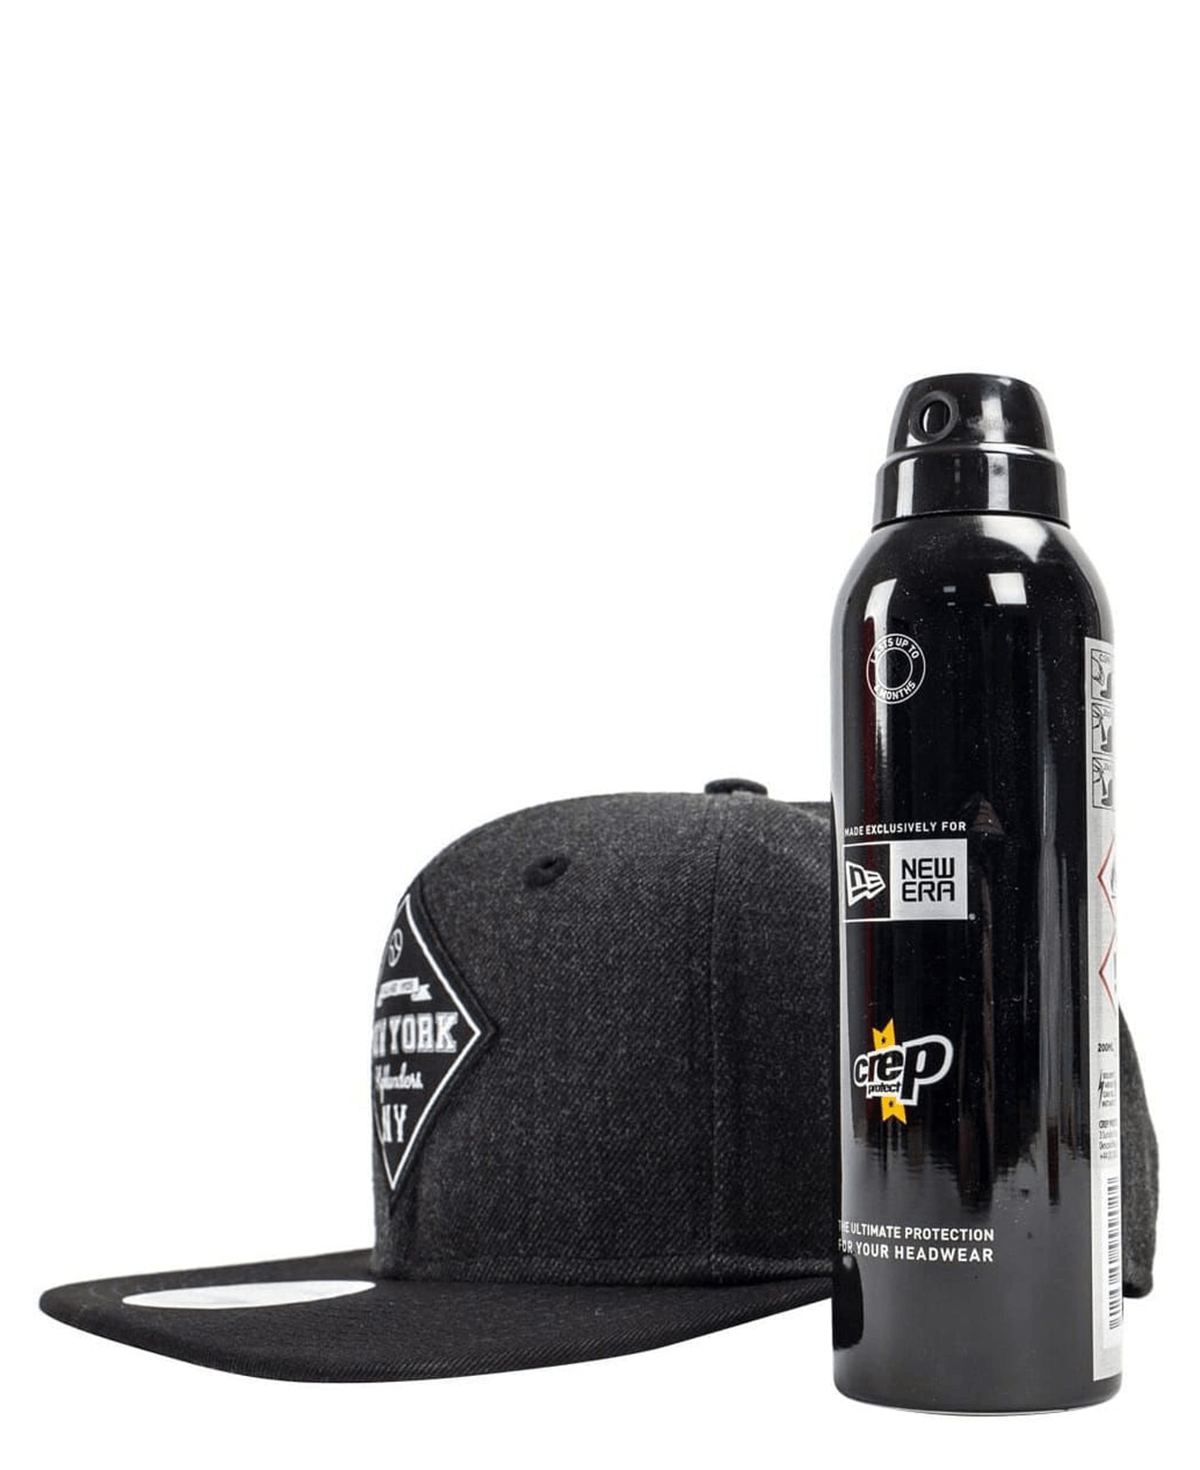 Crep Protect x New Era Headwear Protection Spray - Repel Stains from Caps &  Hats (200ml)